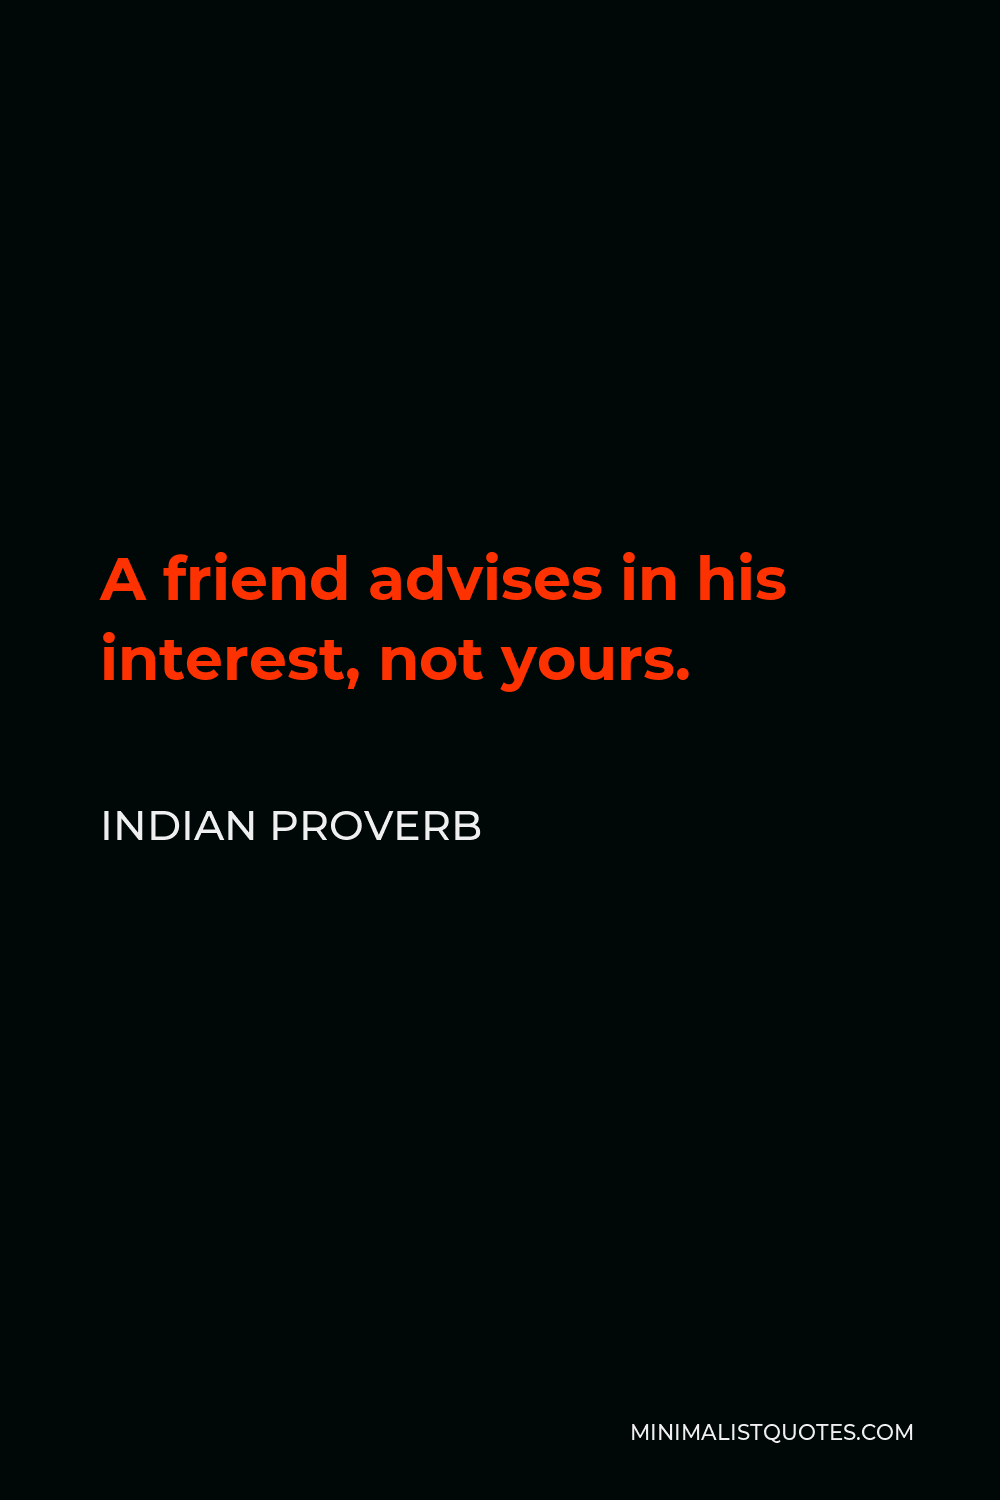 Indian Proverb Quote - A friend advises in his interest, not yours.